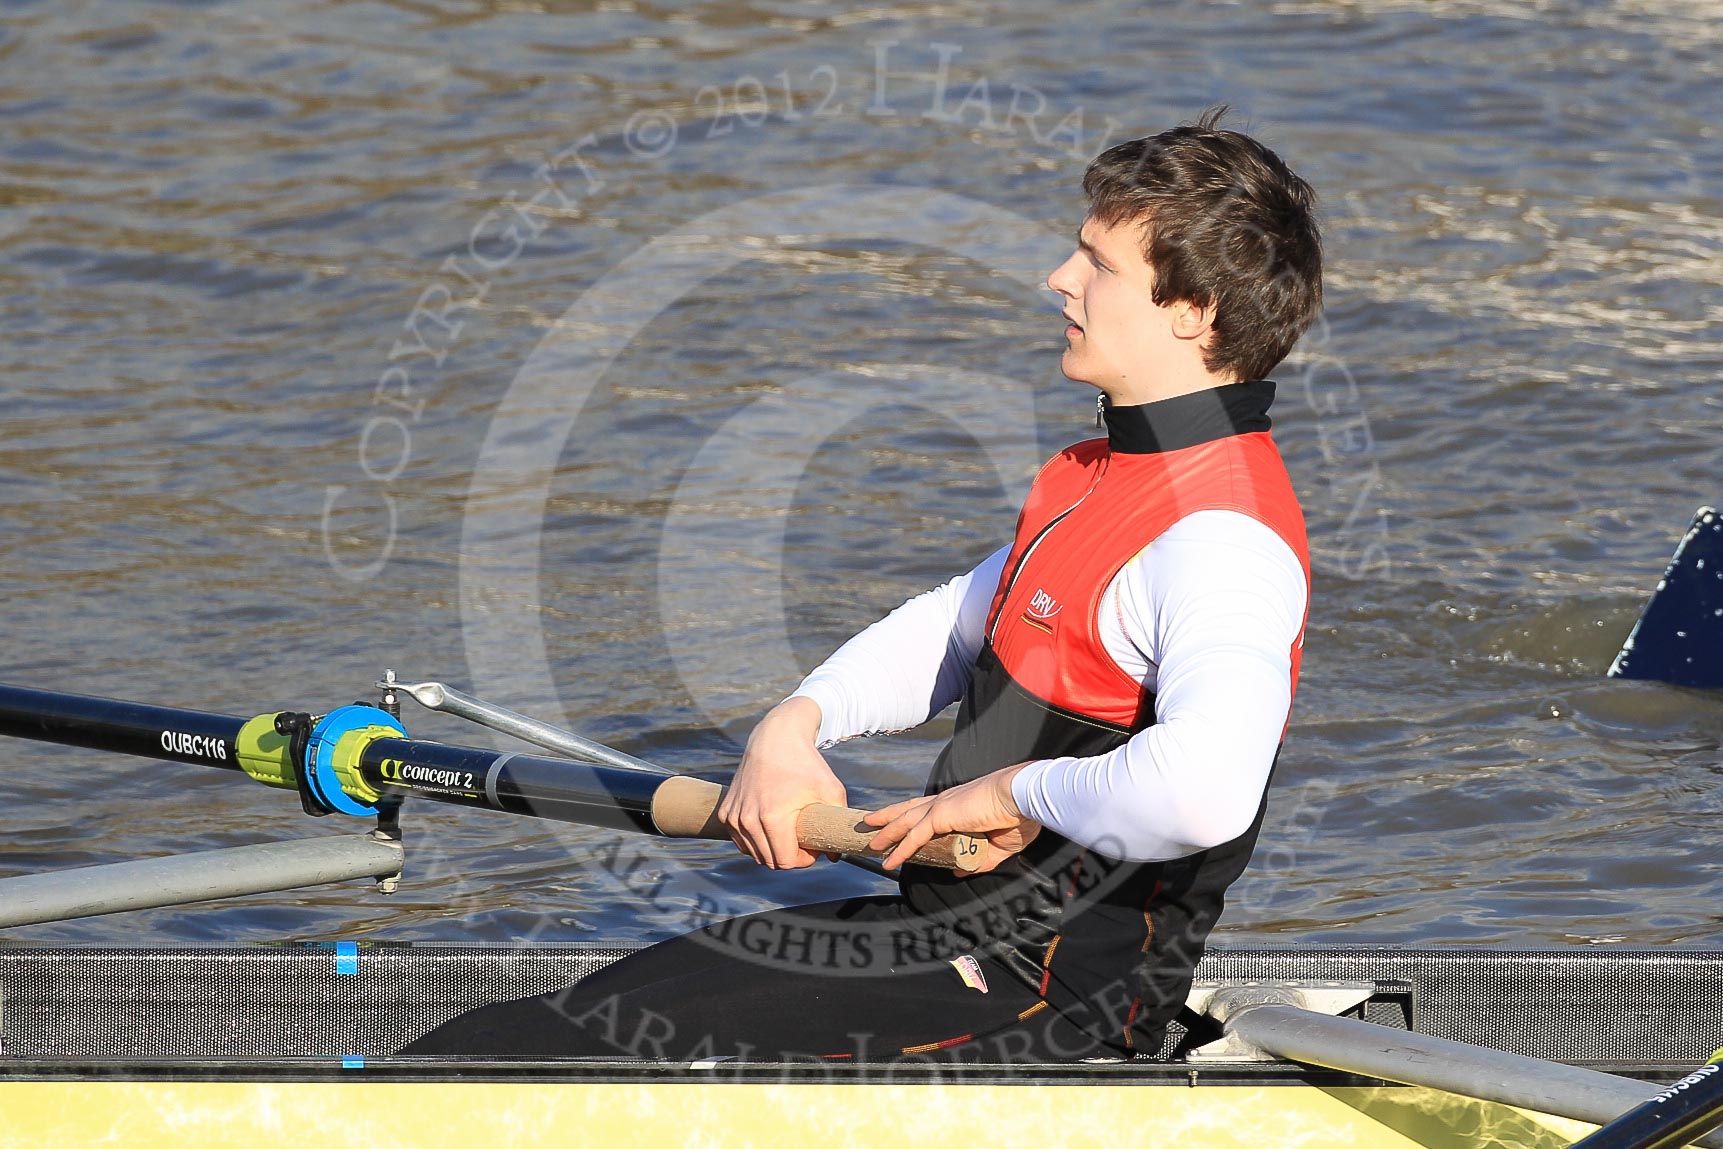 The Boat Race season 2012 - fixture OUBC vs German U23: #5 in the German U23 boat - Malte Jaschik. Malte is still at school and is planning to take his A-levels..
River Thames between Putney and Mortlake,
London,

United Kingdom,
on 26 February 2012 at 14:48, image #21